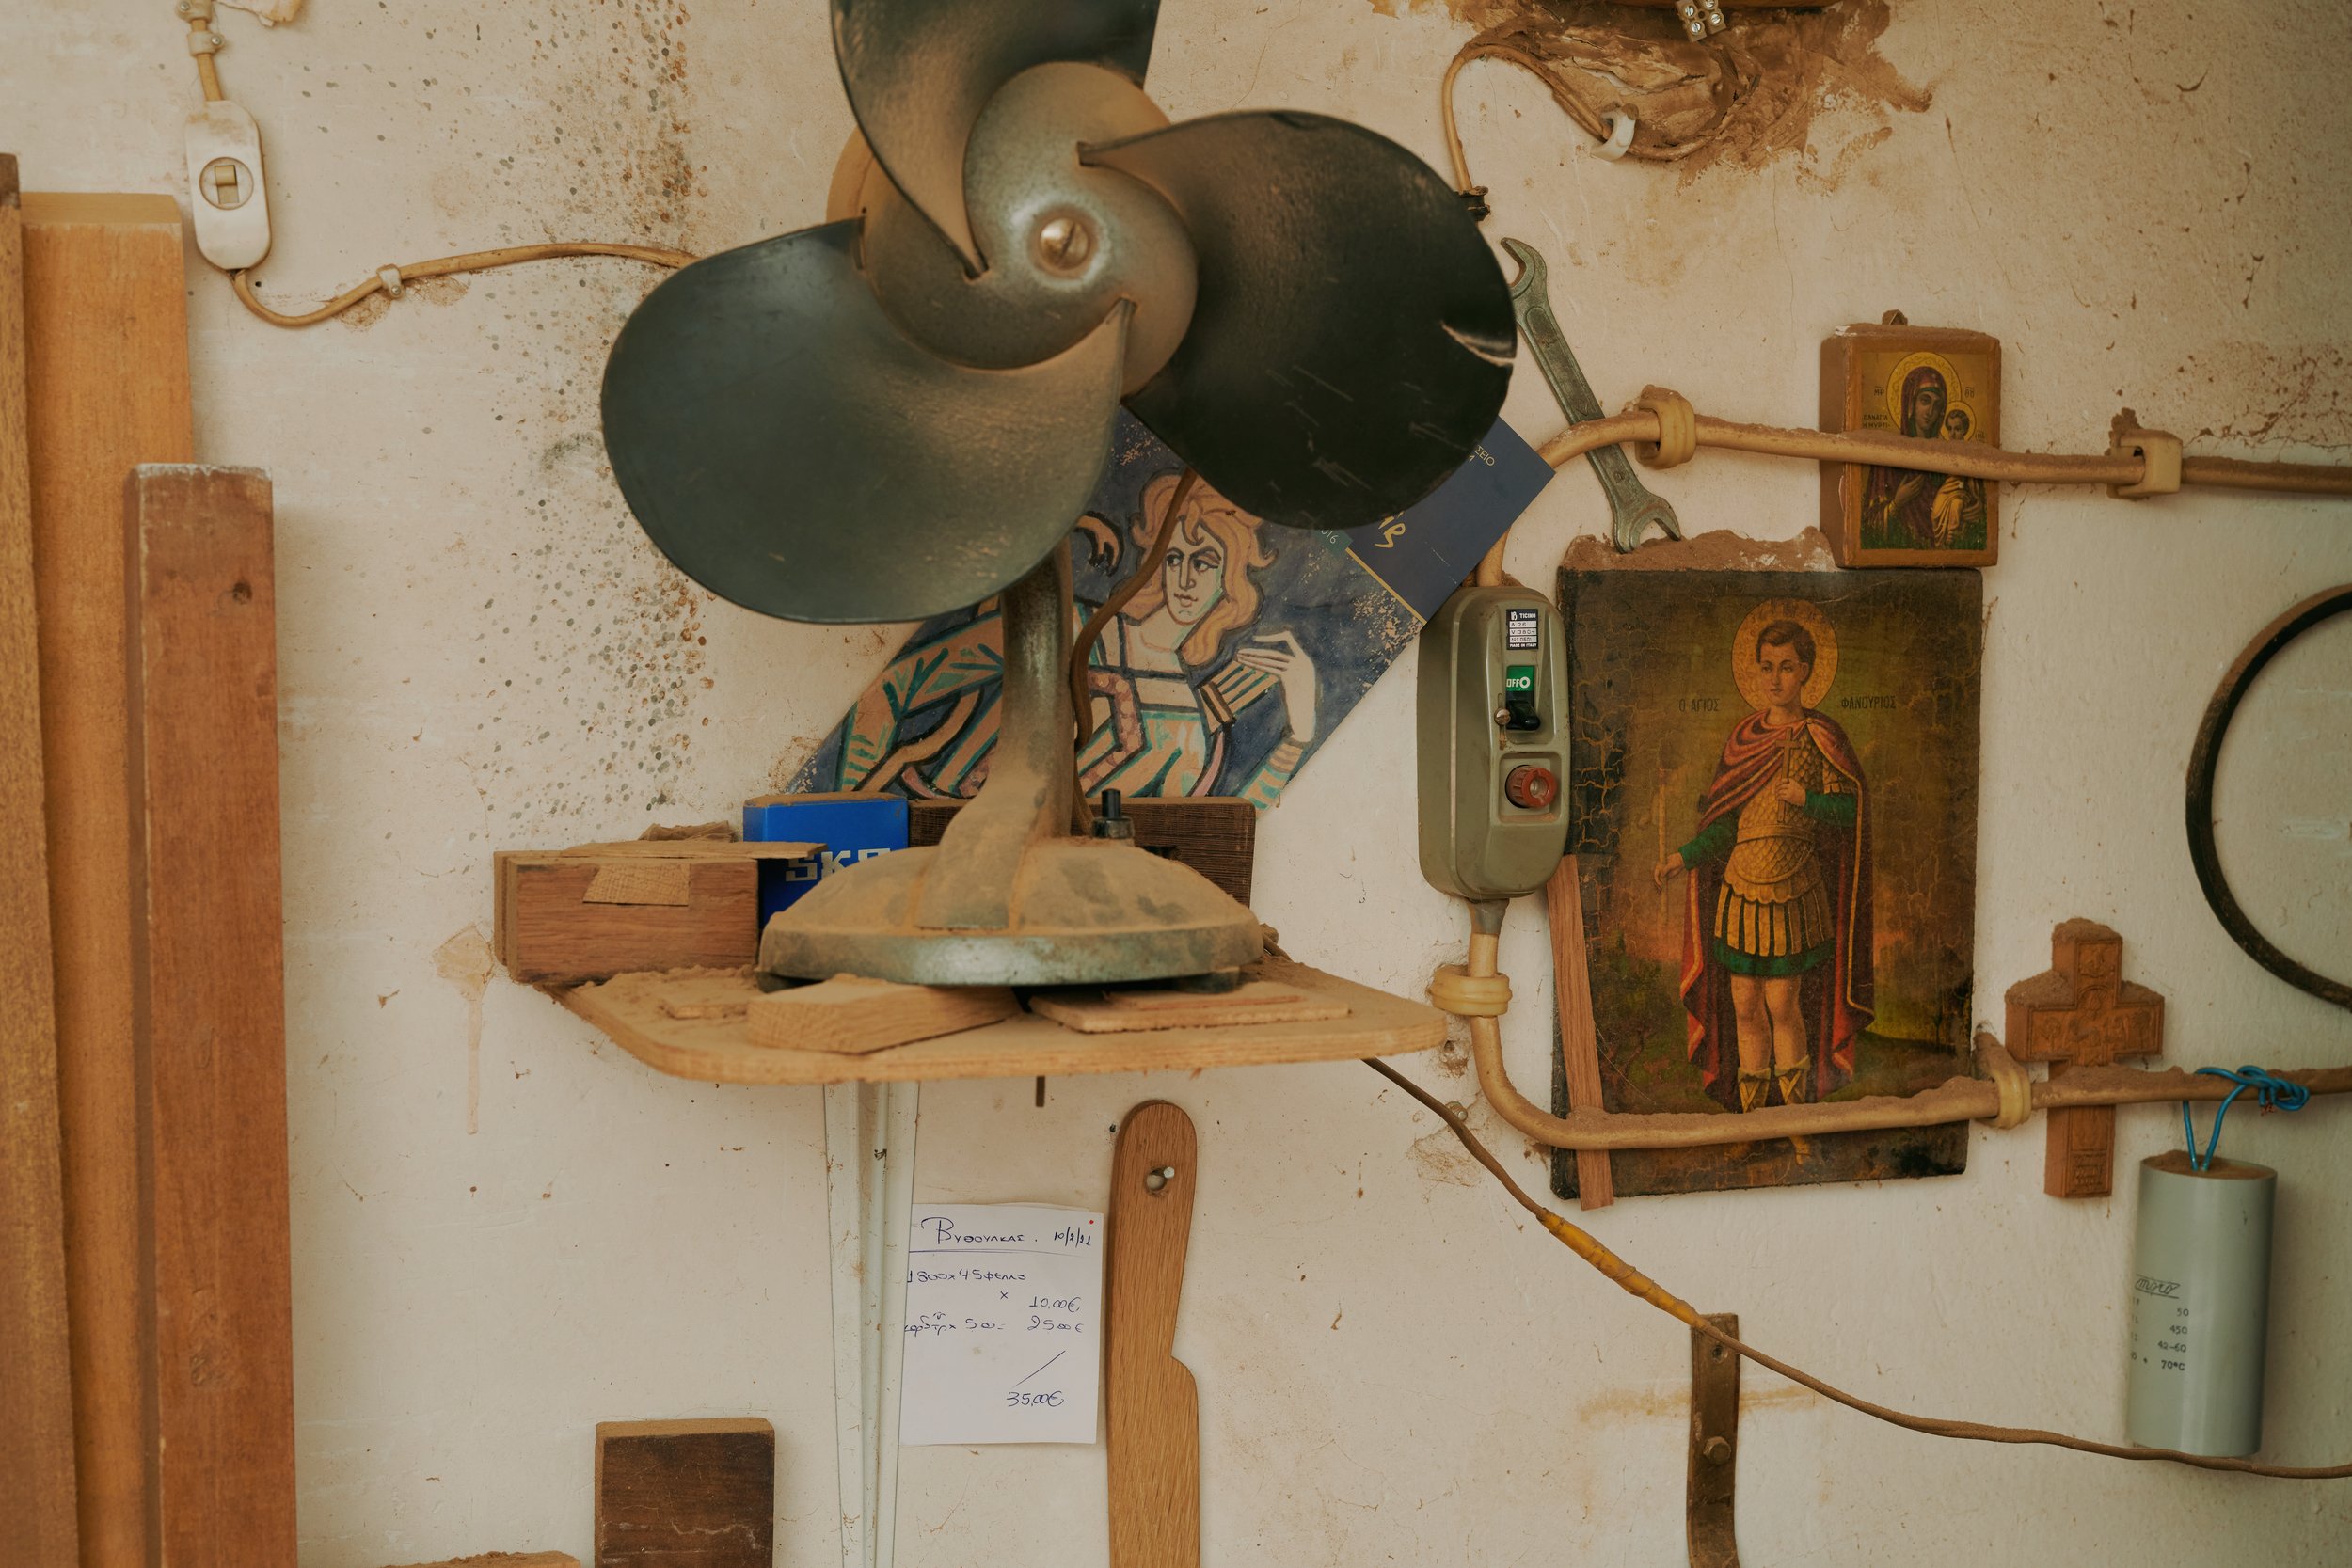   Saints regularly appear within the workshop, in different materialities of craftsmanship  